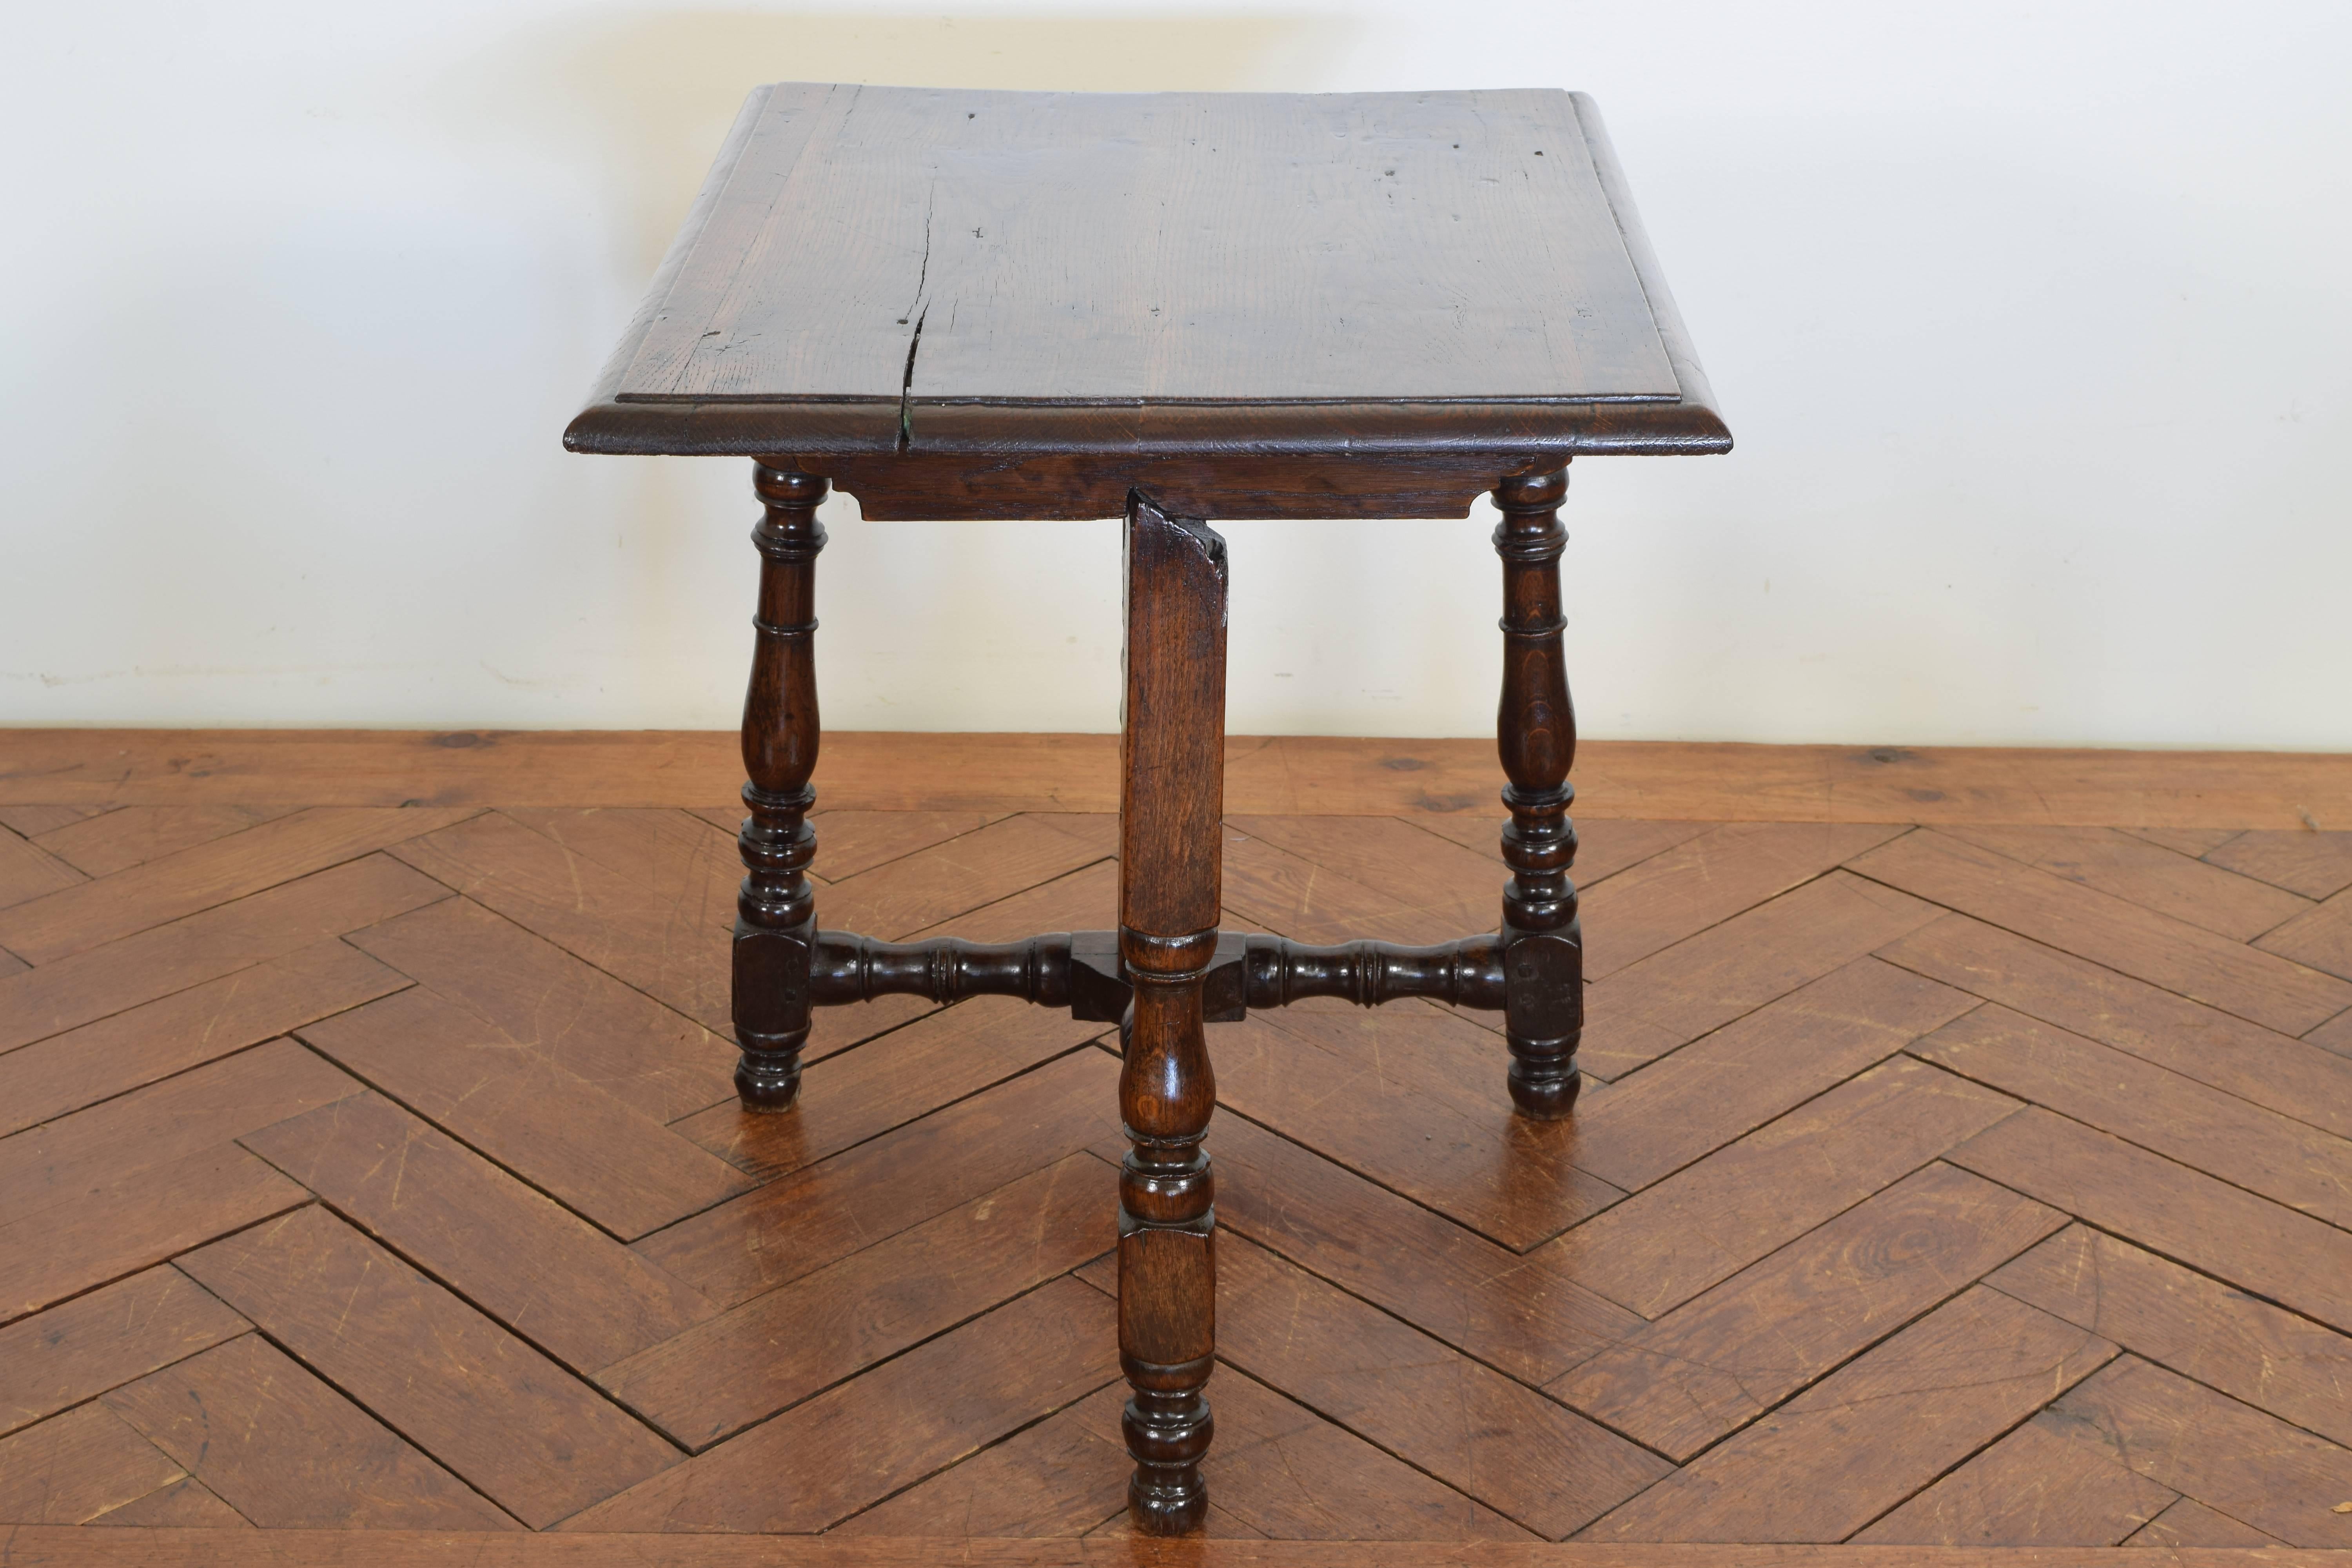 The rectangular top with a molded edge, hinged atop a framework of turned legs and stretchers.